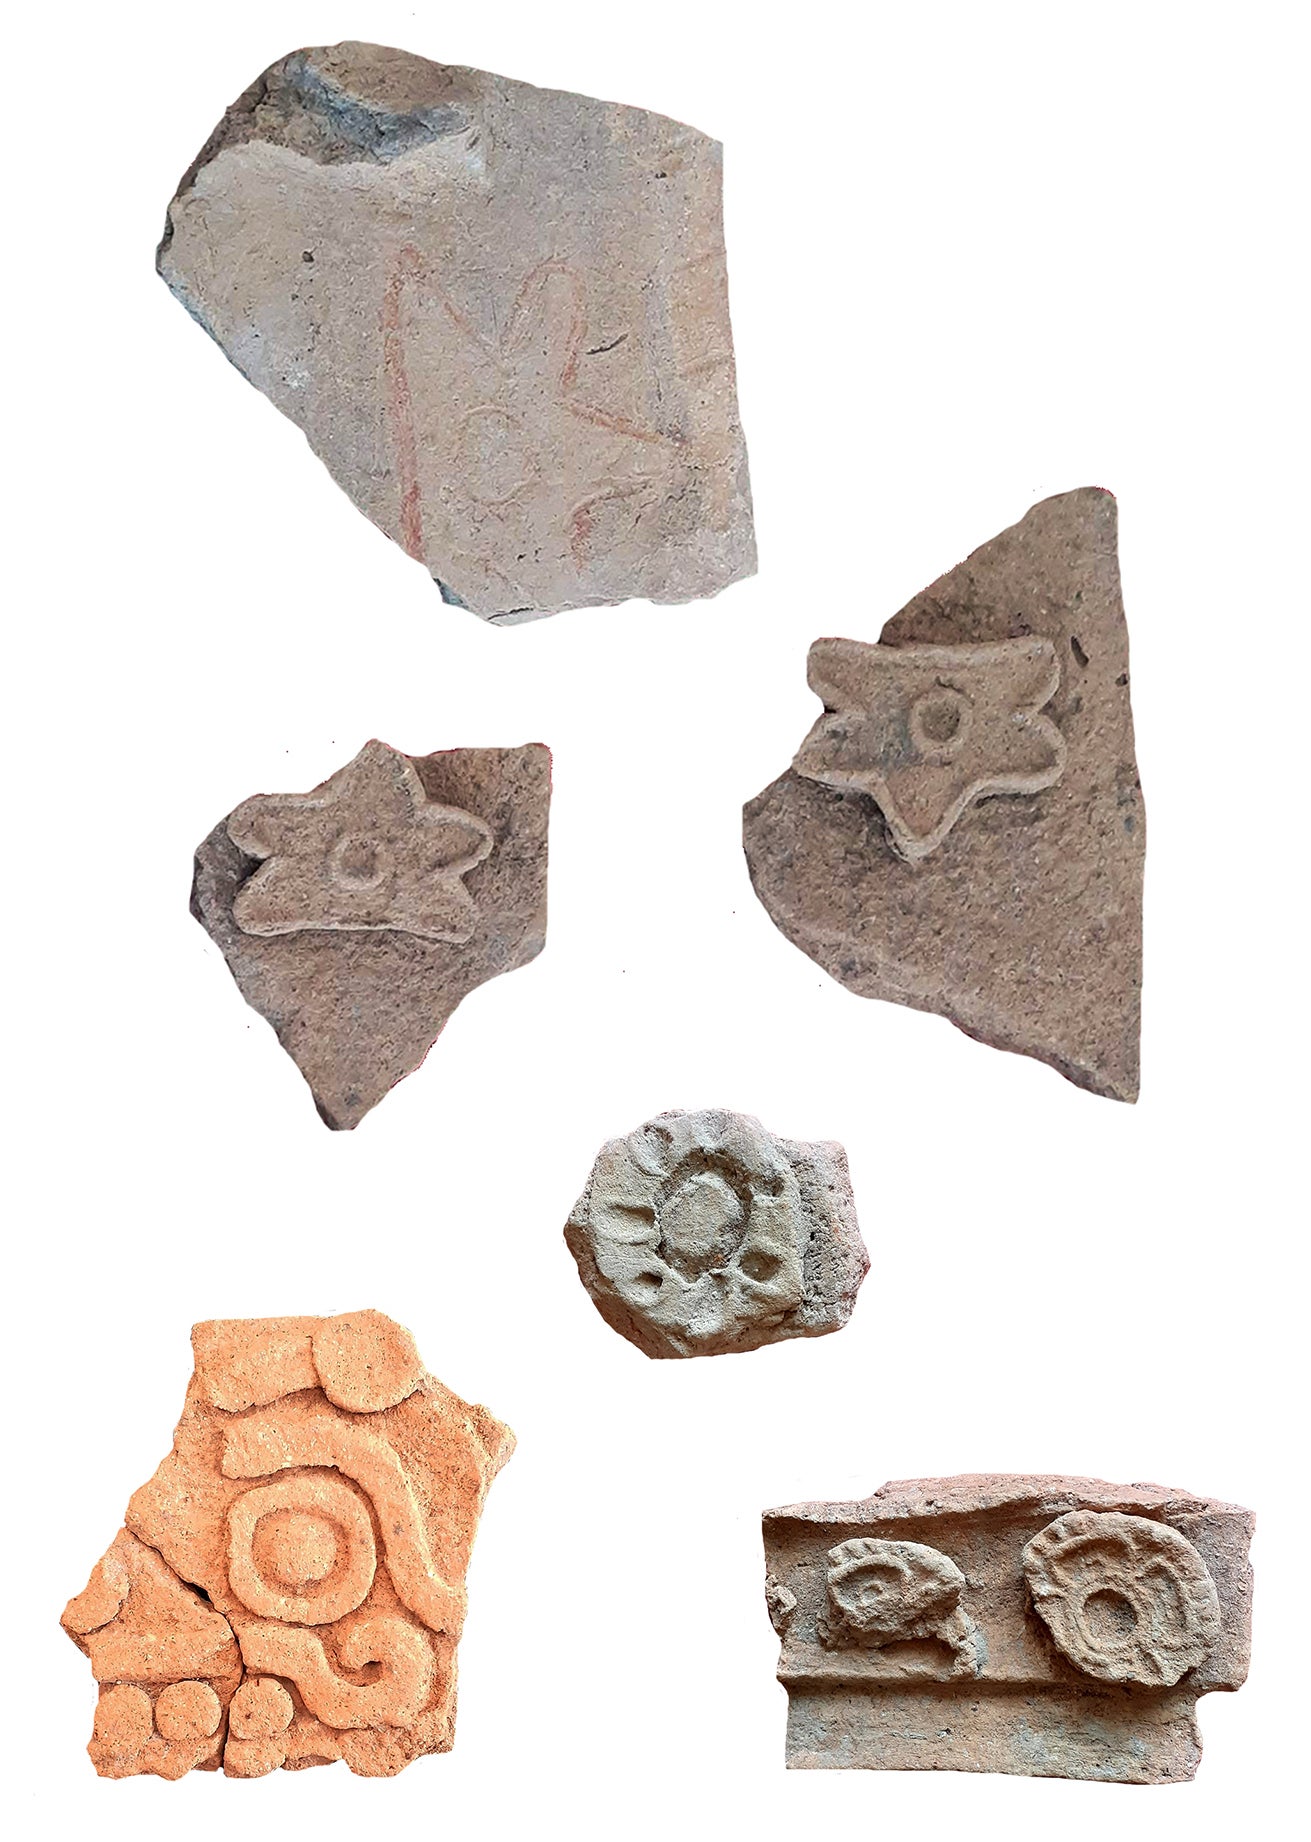 Teotihuacan-style incense burner fragments found at the front platform of the citadel.  (Image: E. Román/PACUNAM/Antiquity)